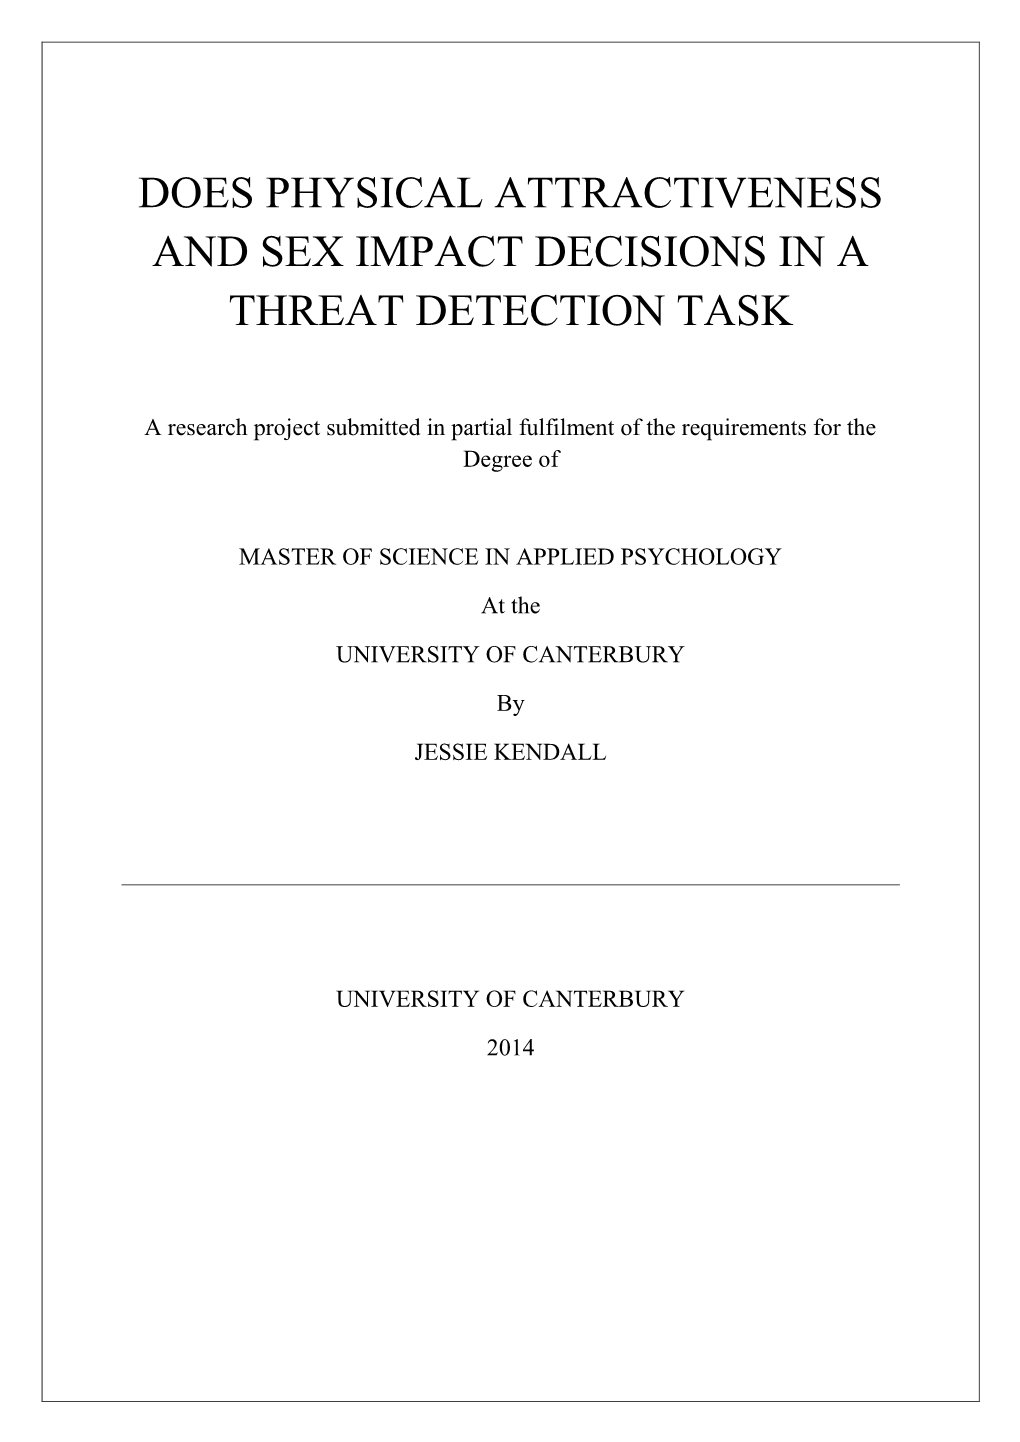 Does Physical Attractiveness and Sex Impact Decisions in a Threat Detection Task